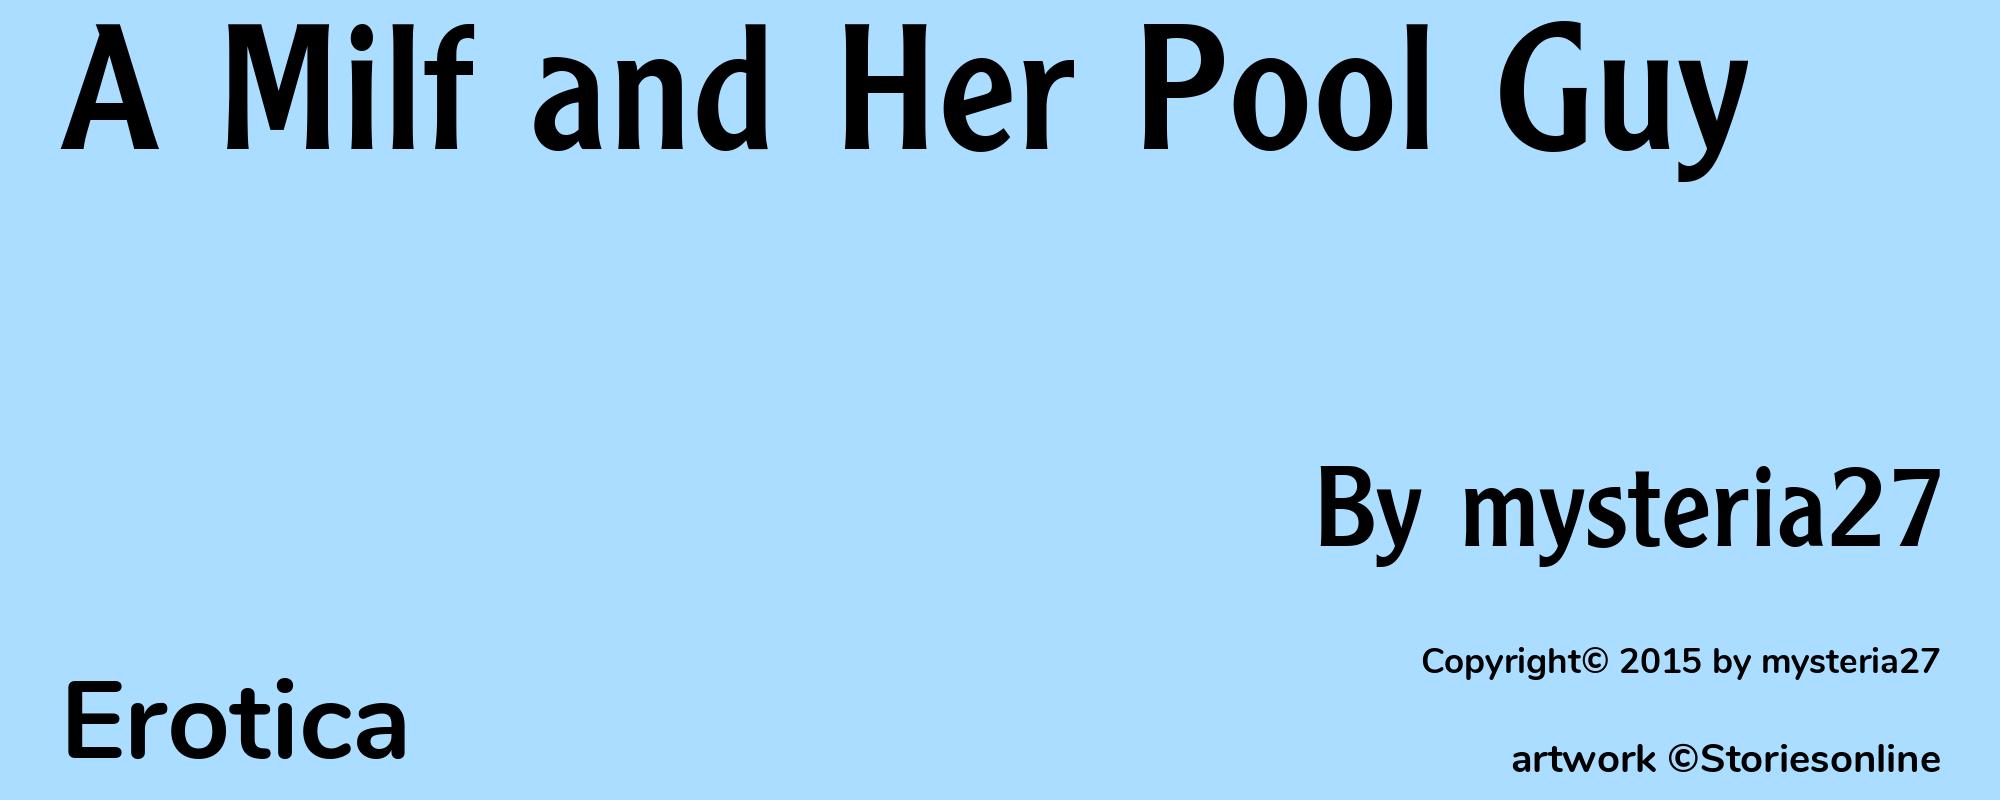 A Milf and Her Pool Guy - Cover